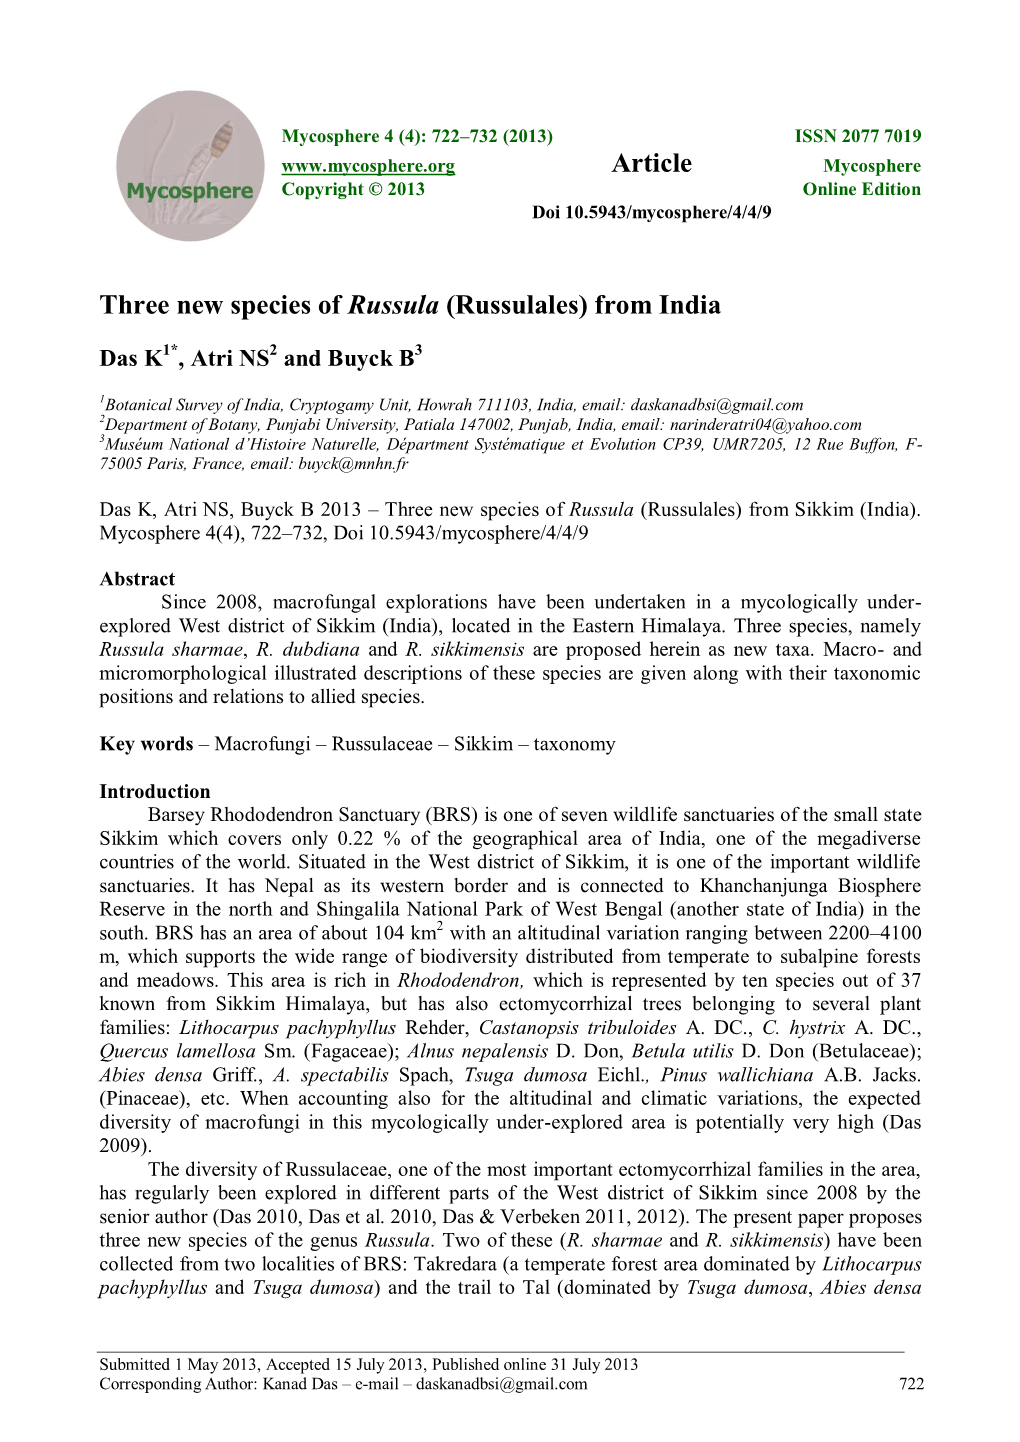 Three New Species of Russula (Russulales) from Sikkim (India)